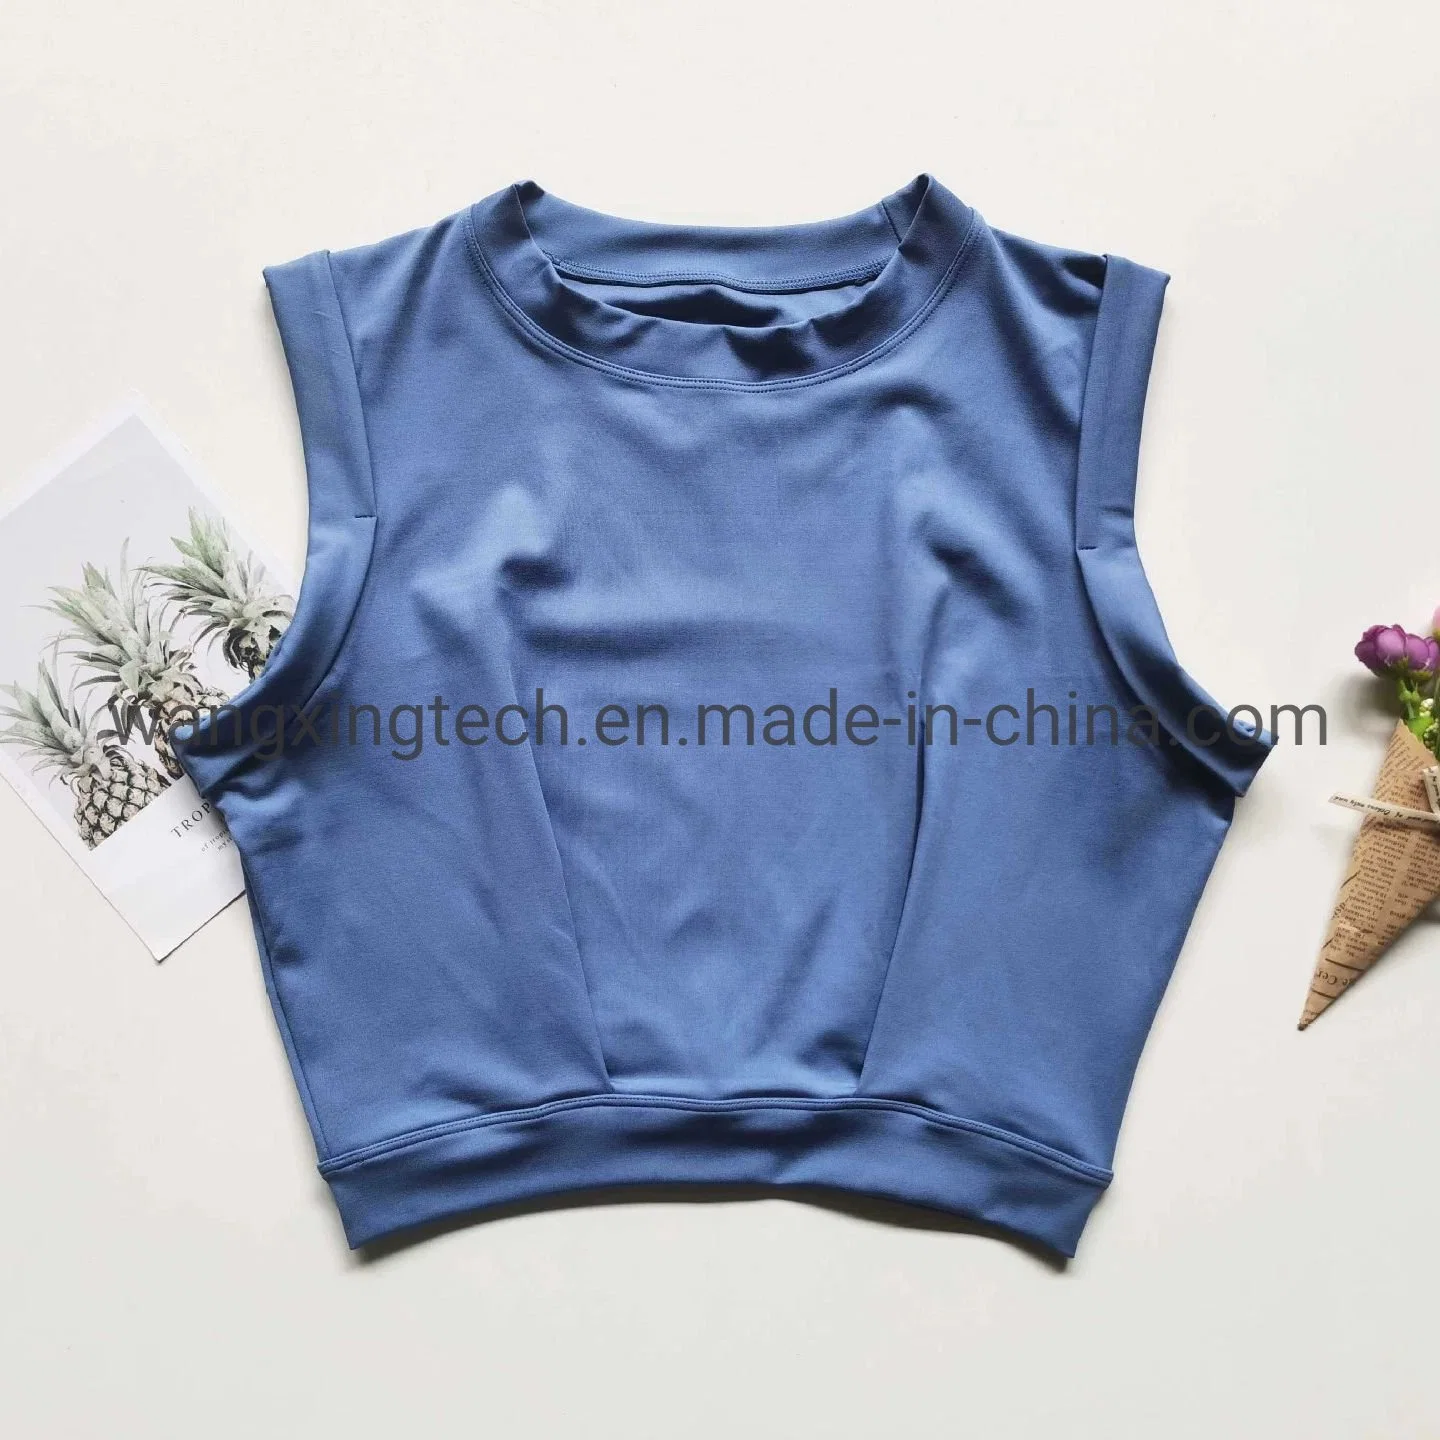 Fashion Crop Top Athletic Shirts for Women Cute Sleeveless Yoga Tops Running Gym Workout Shirts